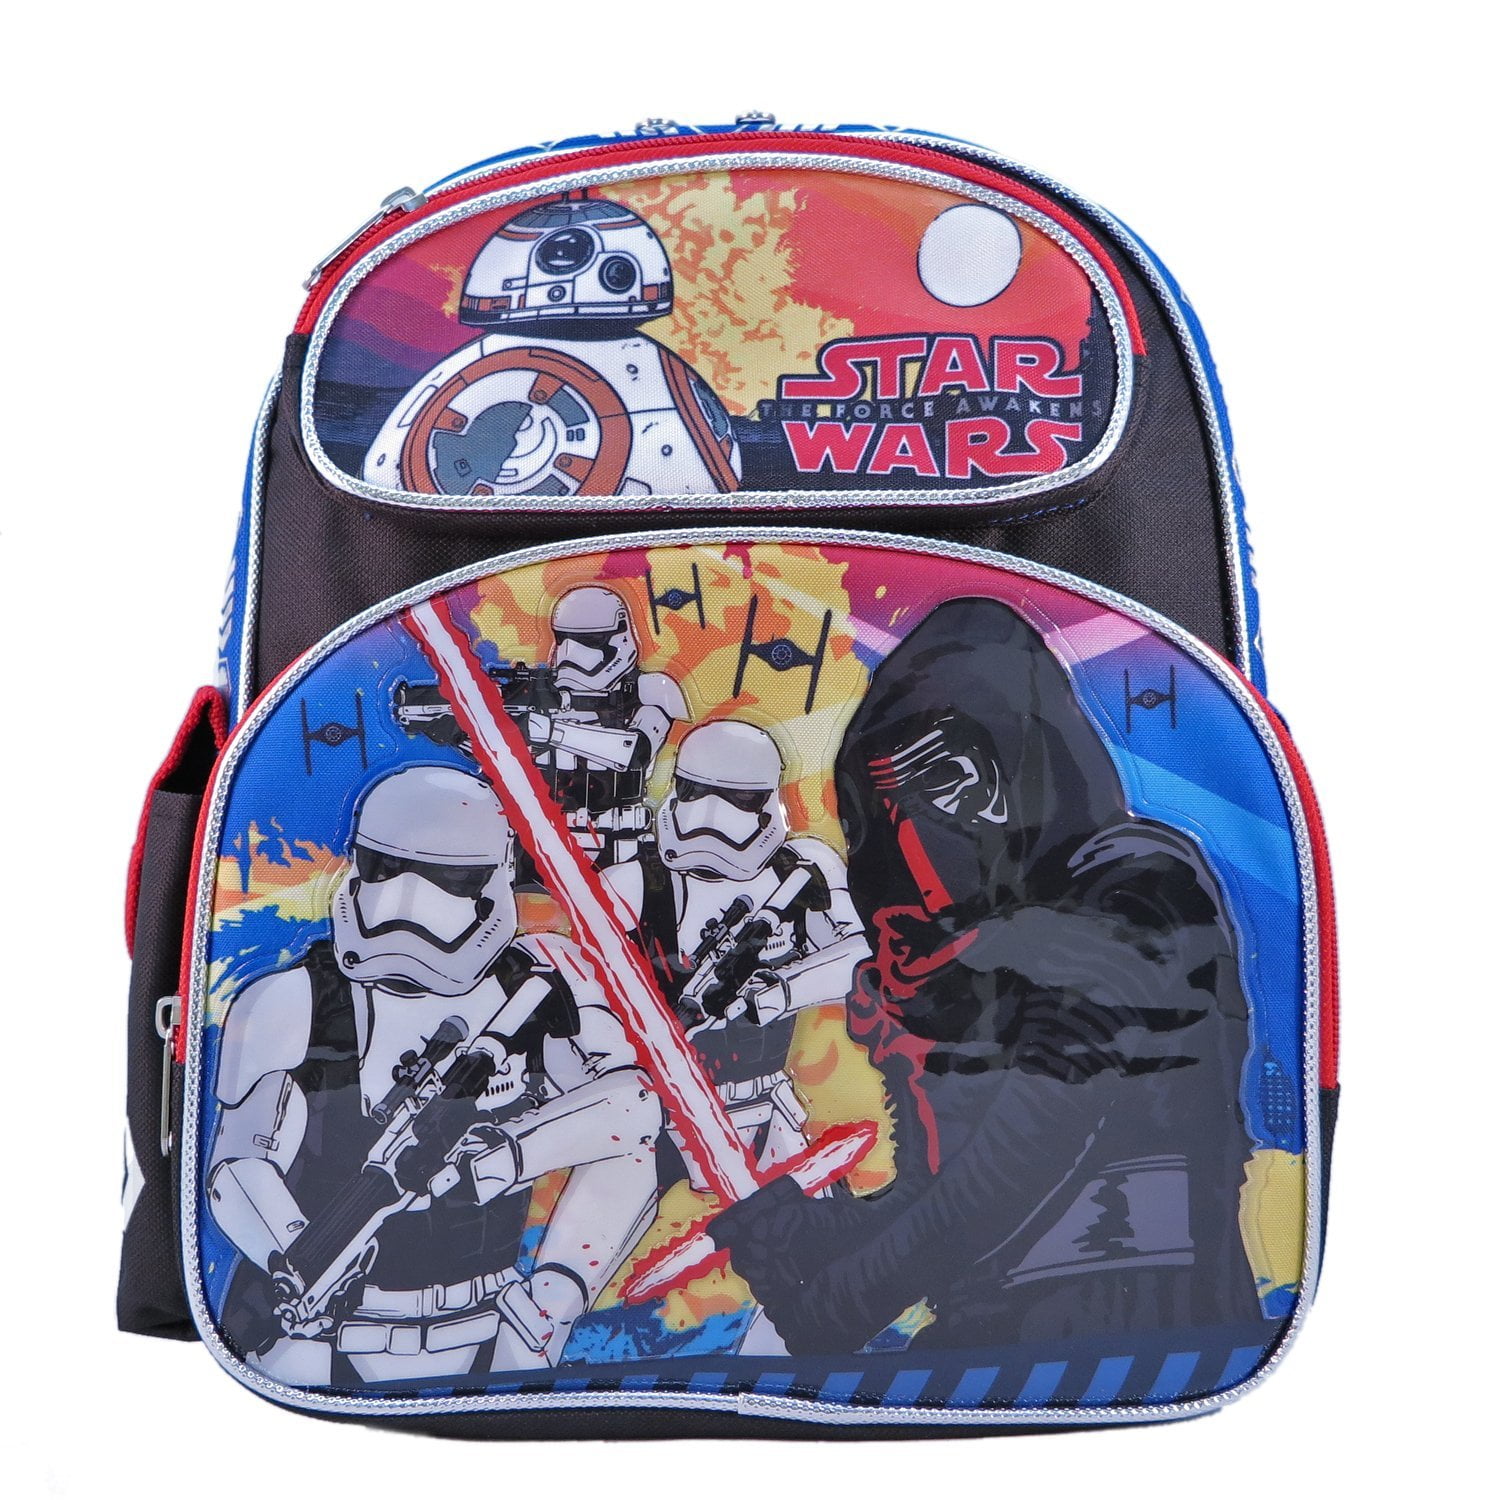 Details about   Star Wars  The Force Awakens 28”x56” Black/Red Sleeping Bag w/ Backpack for Kids 